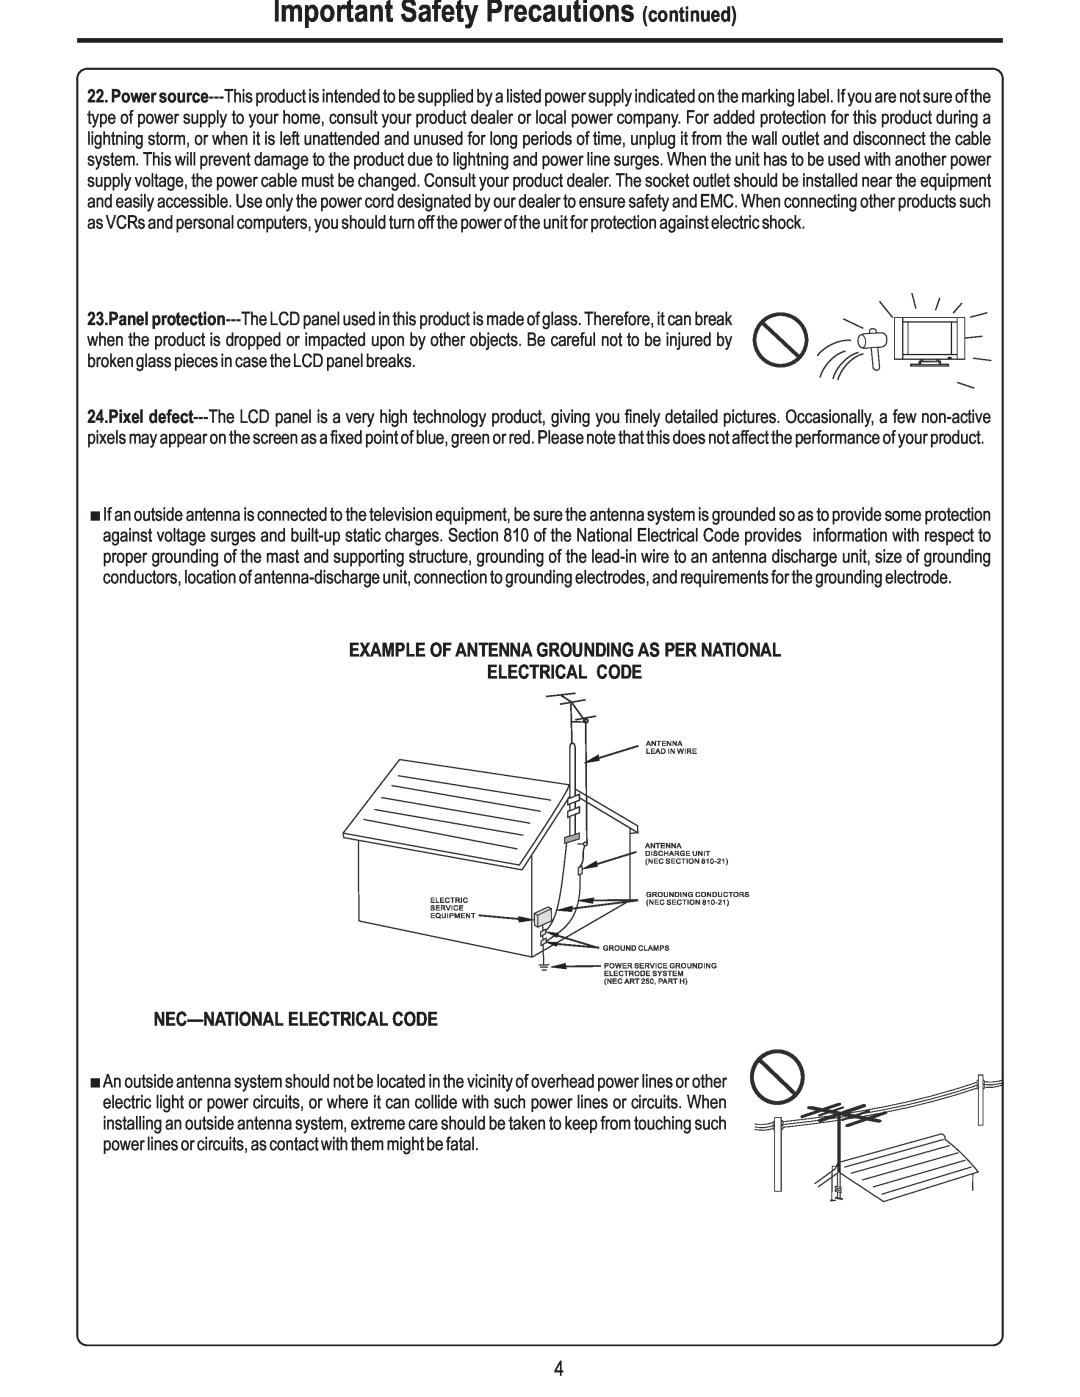 Polaroid FLM-3225 Important Safety Precautions continued, Example Of Antenna Grounding As Per National Electrical Code 